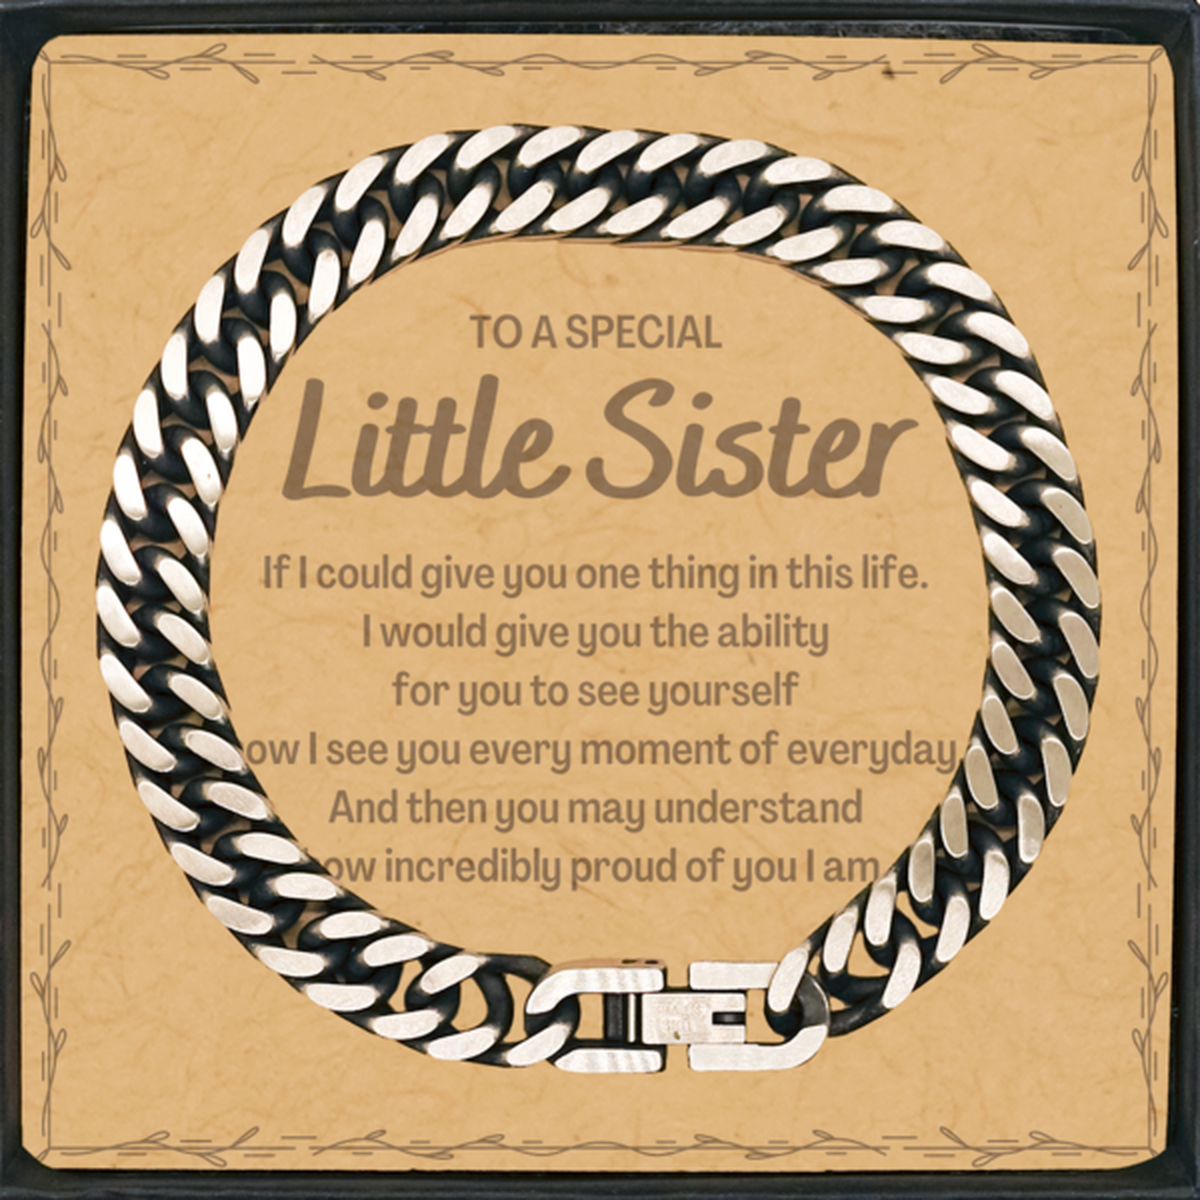 To My Little Sister Cuban Link Chain Bracelet, Gifts For Little Sister Message Card, Inspirational Gifts for Christmas Birthday, Epic Gifts for Little Sister To A Special Little Sister how incredibly proud of you I am